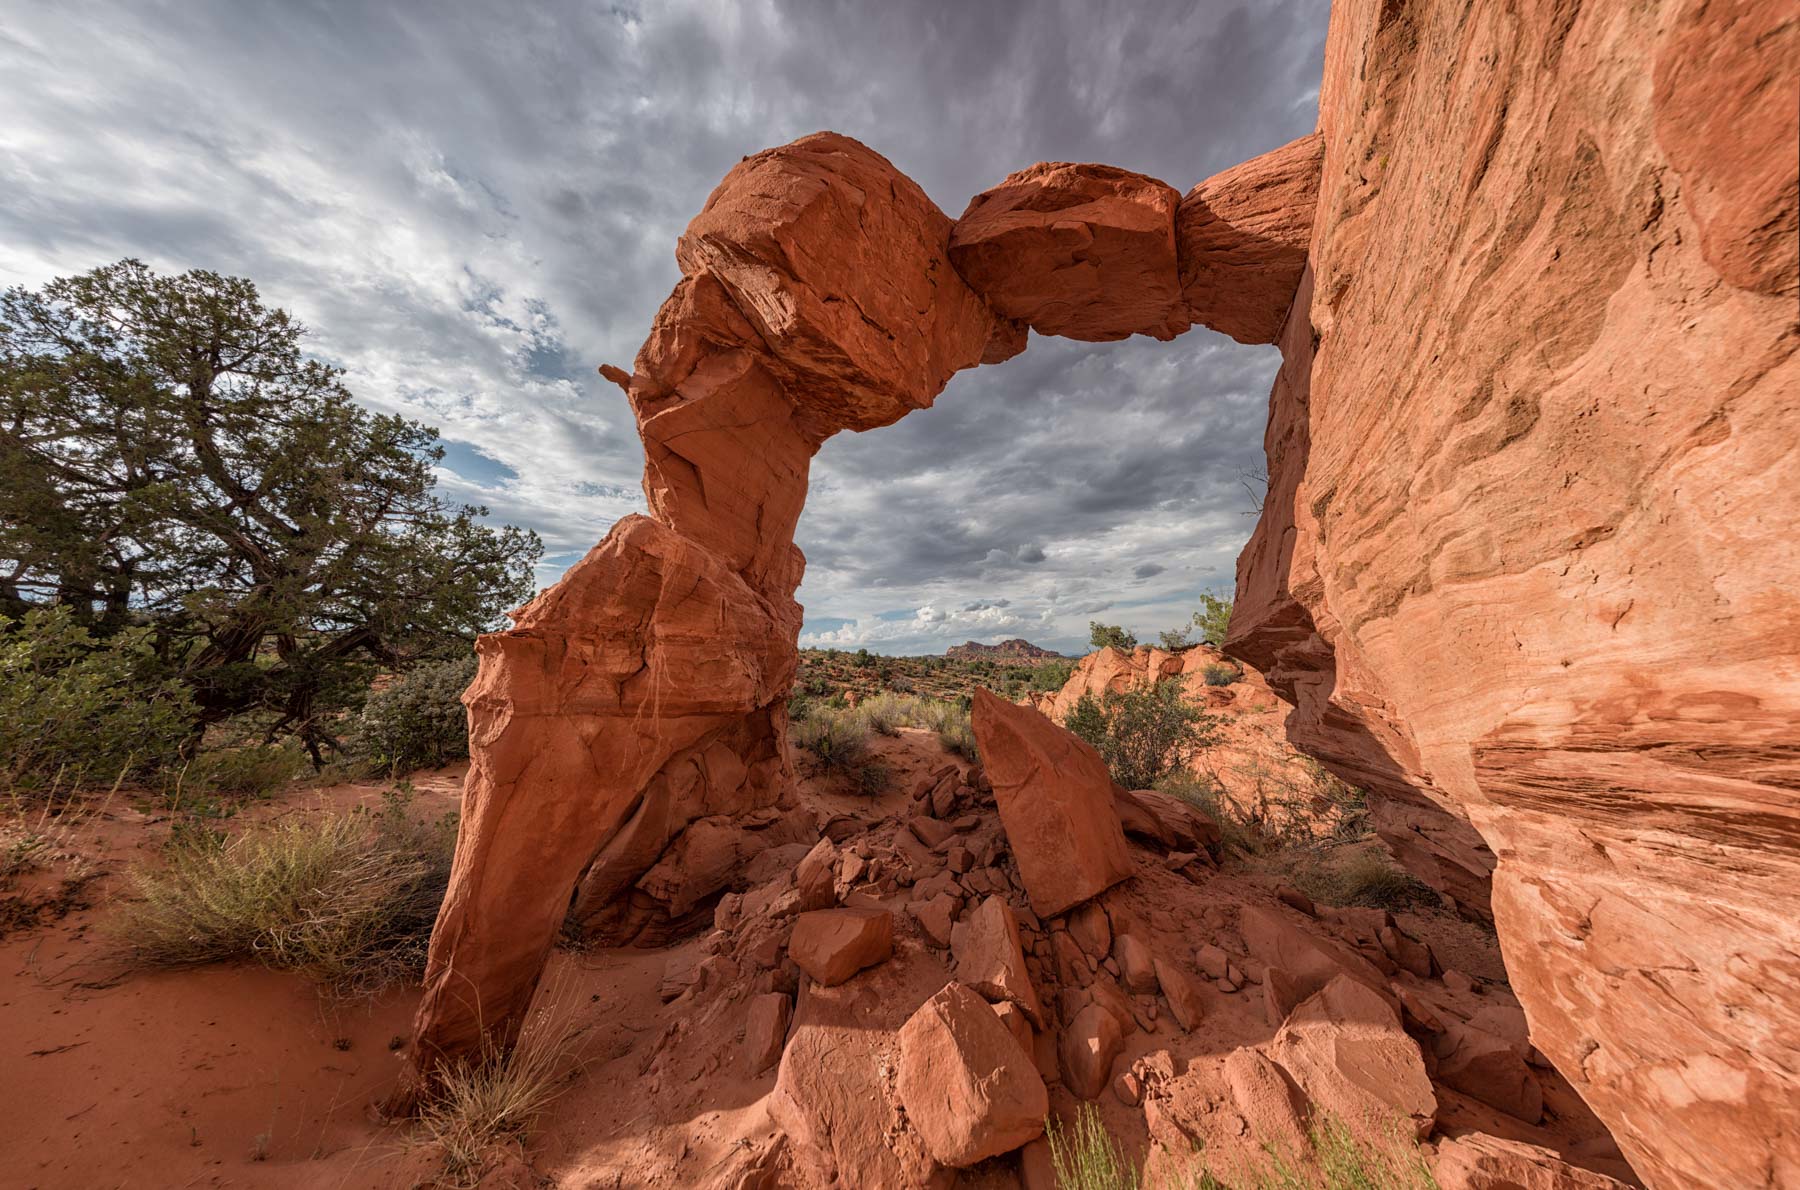 High Heel Arch outside of the Coyote Buttes North permit area